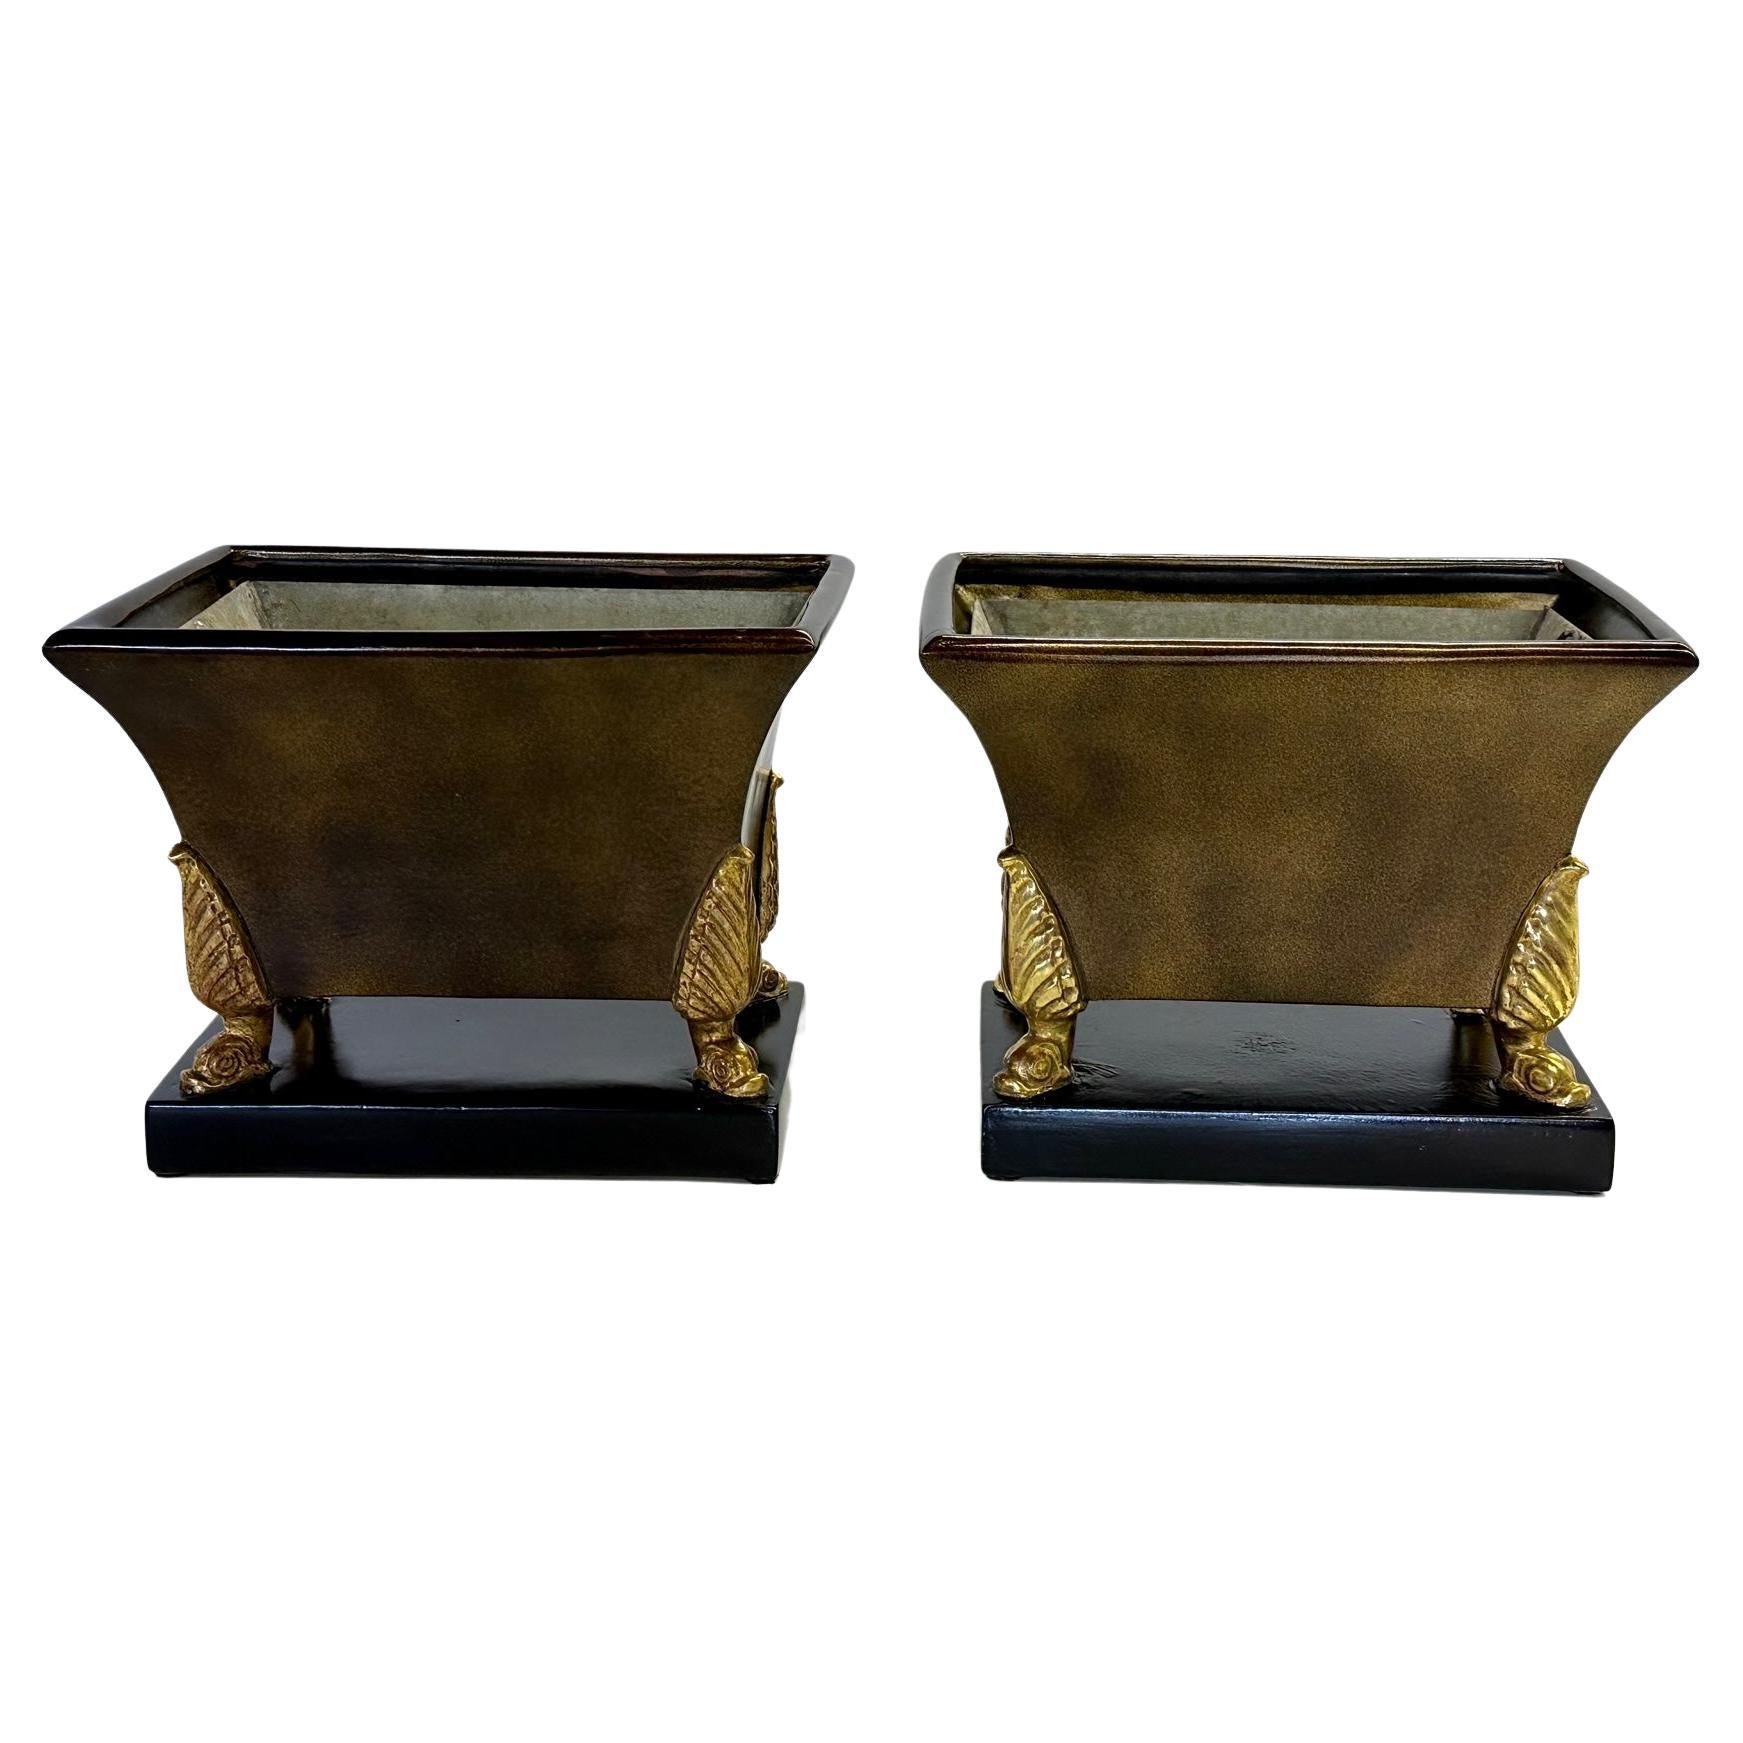 Handsome Pair of Italian Regency Style Painted & Glazed Terracotta Planters For Sale